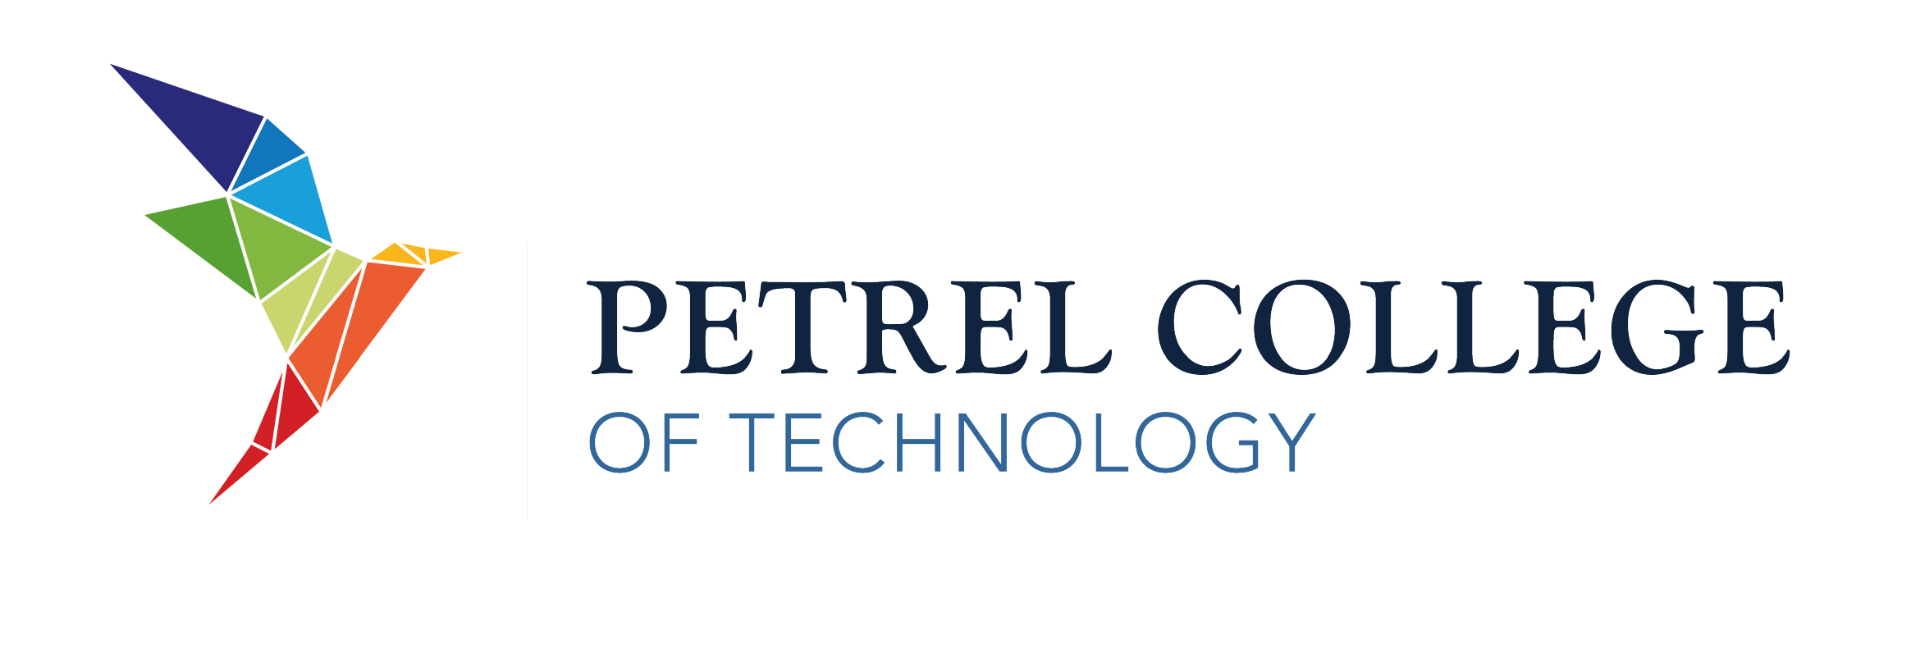 Petrel College of Technology